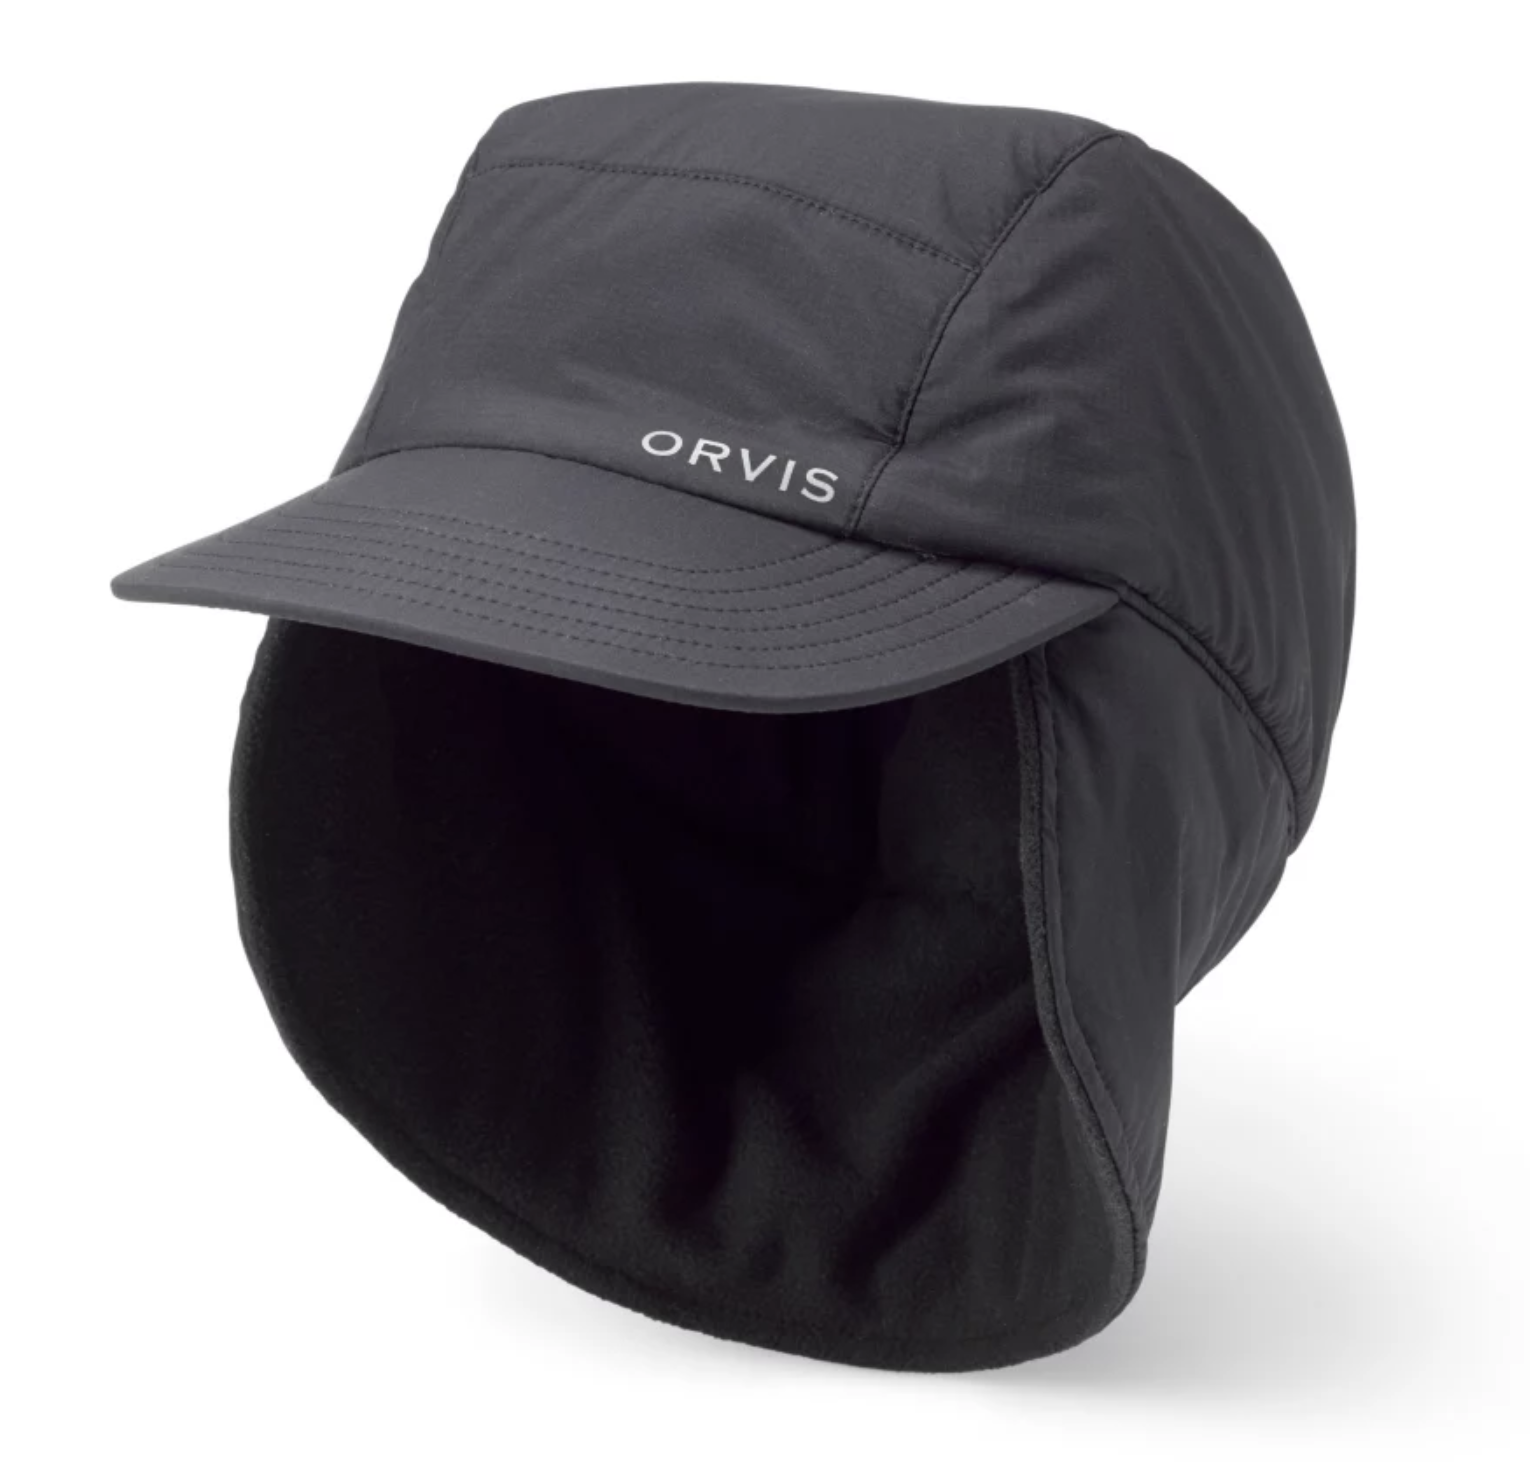 Orvis Pro Insulated Cap - Blackout - S/M